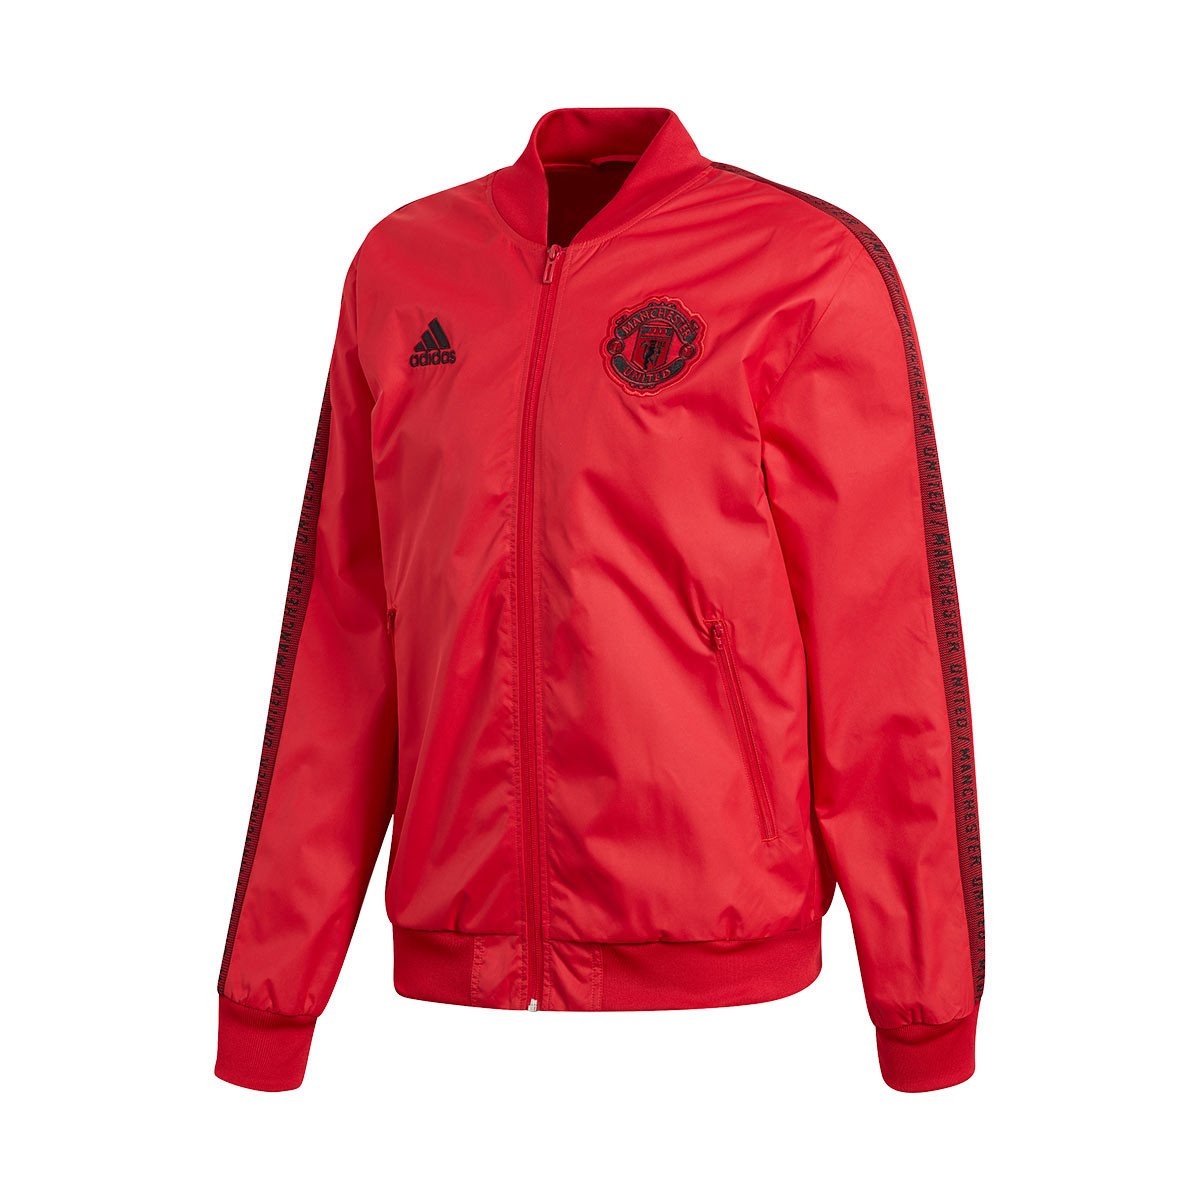 manchester united hoodie 2019